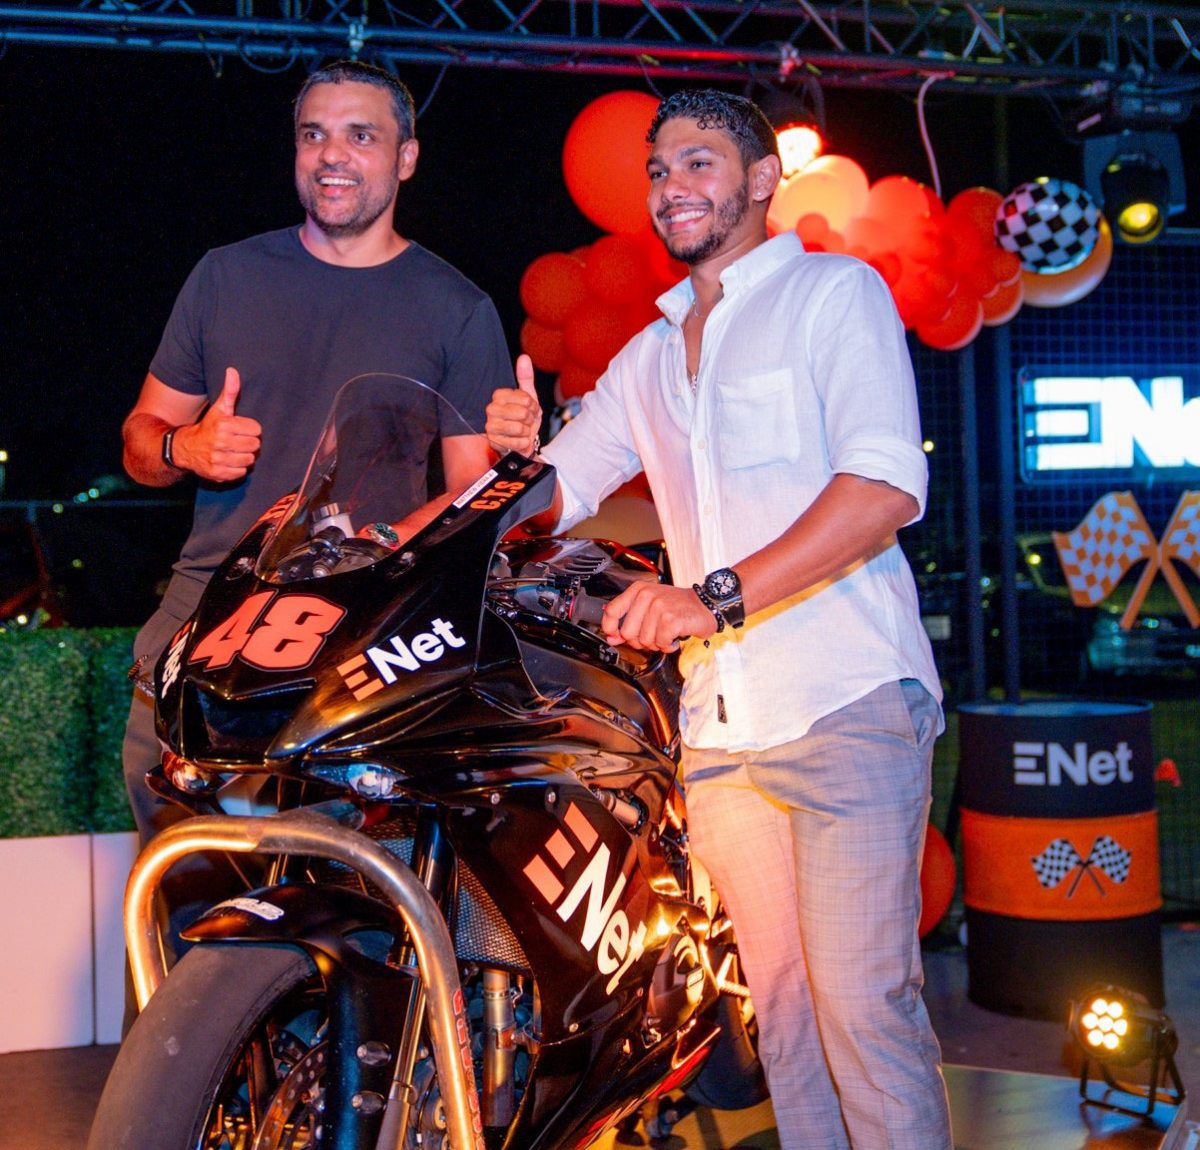 Biker Matthew Vieira (right) and CEO of ENet Vishok Persaud pose with the branded Yamaha R6.